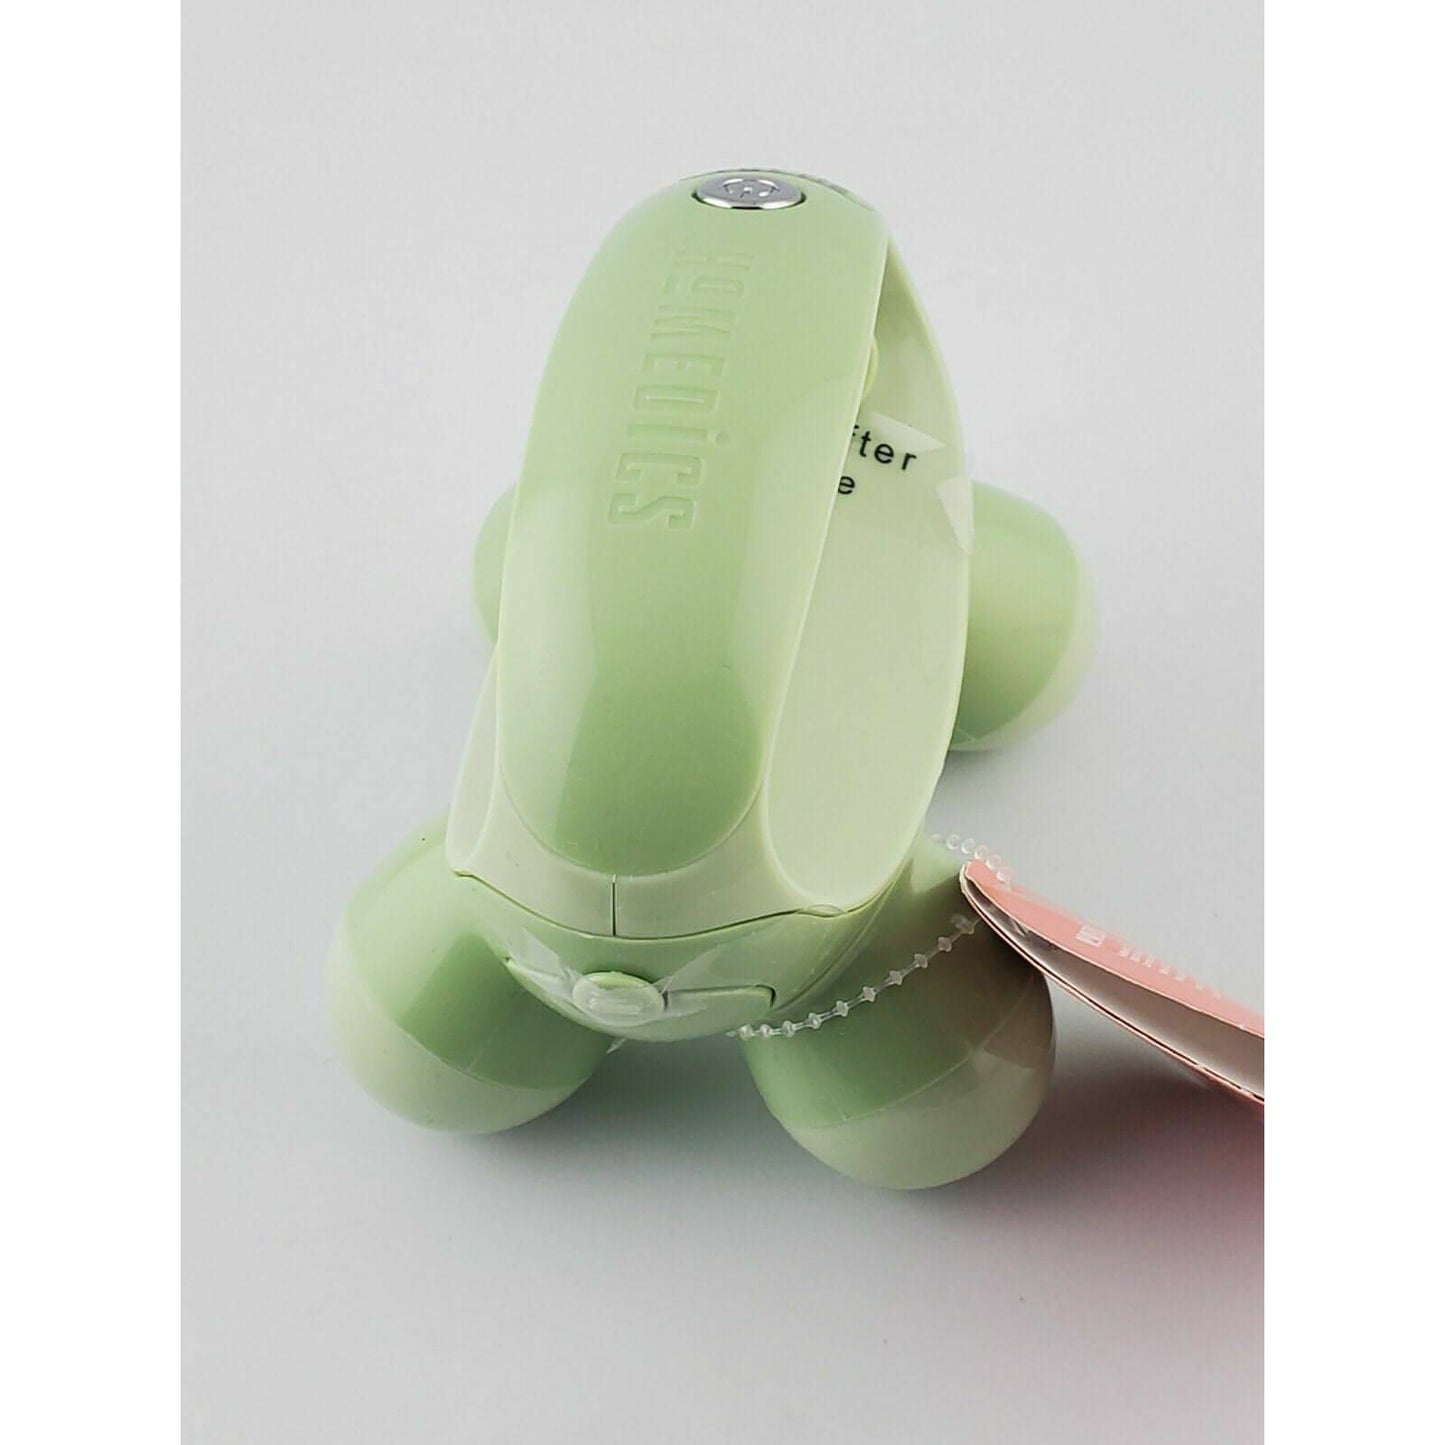 HoMedics Quatro Mini Hand-Held Massager with Hand Grip, Battery Operated - Brandat Outlet